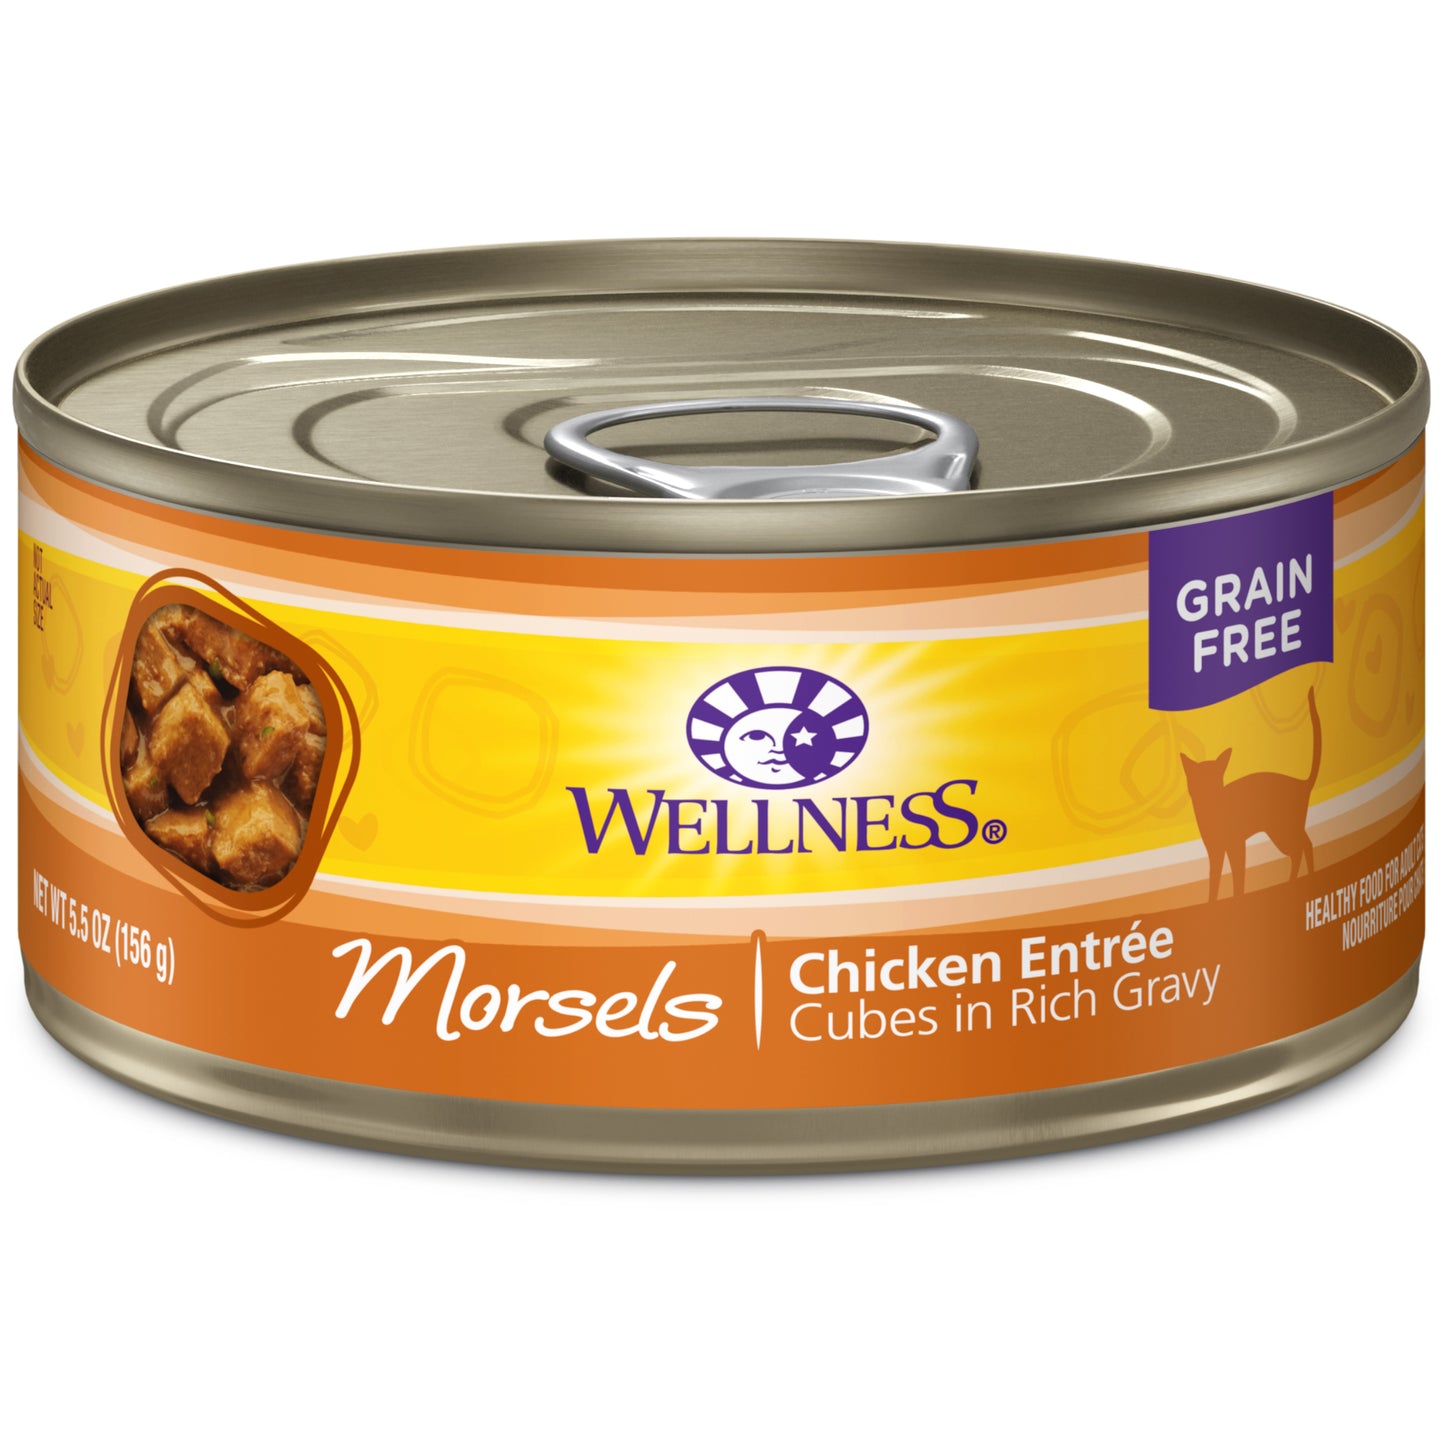 Wellness Complete Health Natural Grain Free Wet Canned Cat Food Cubed Chicken Entree 5.5oz Can